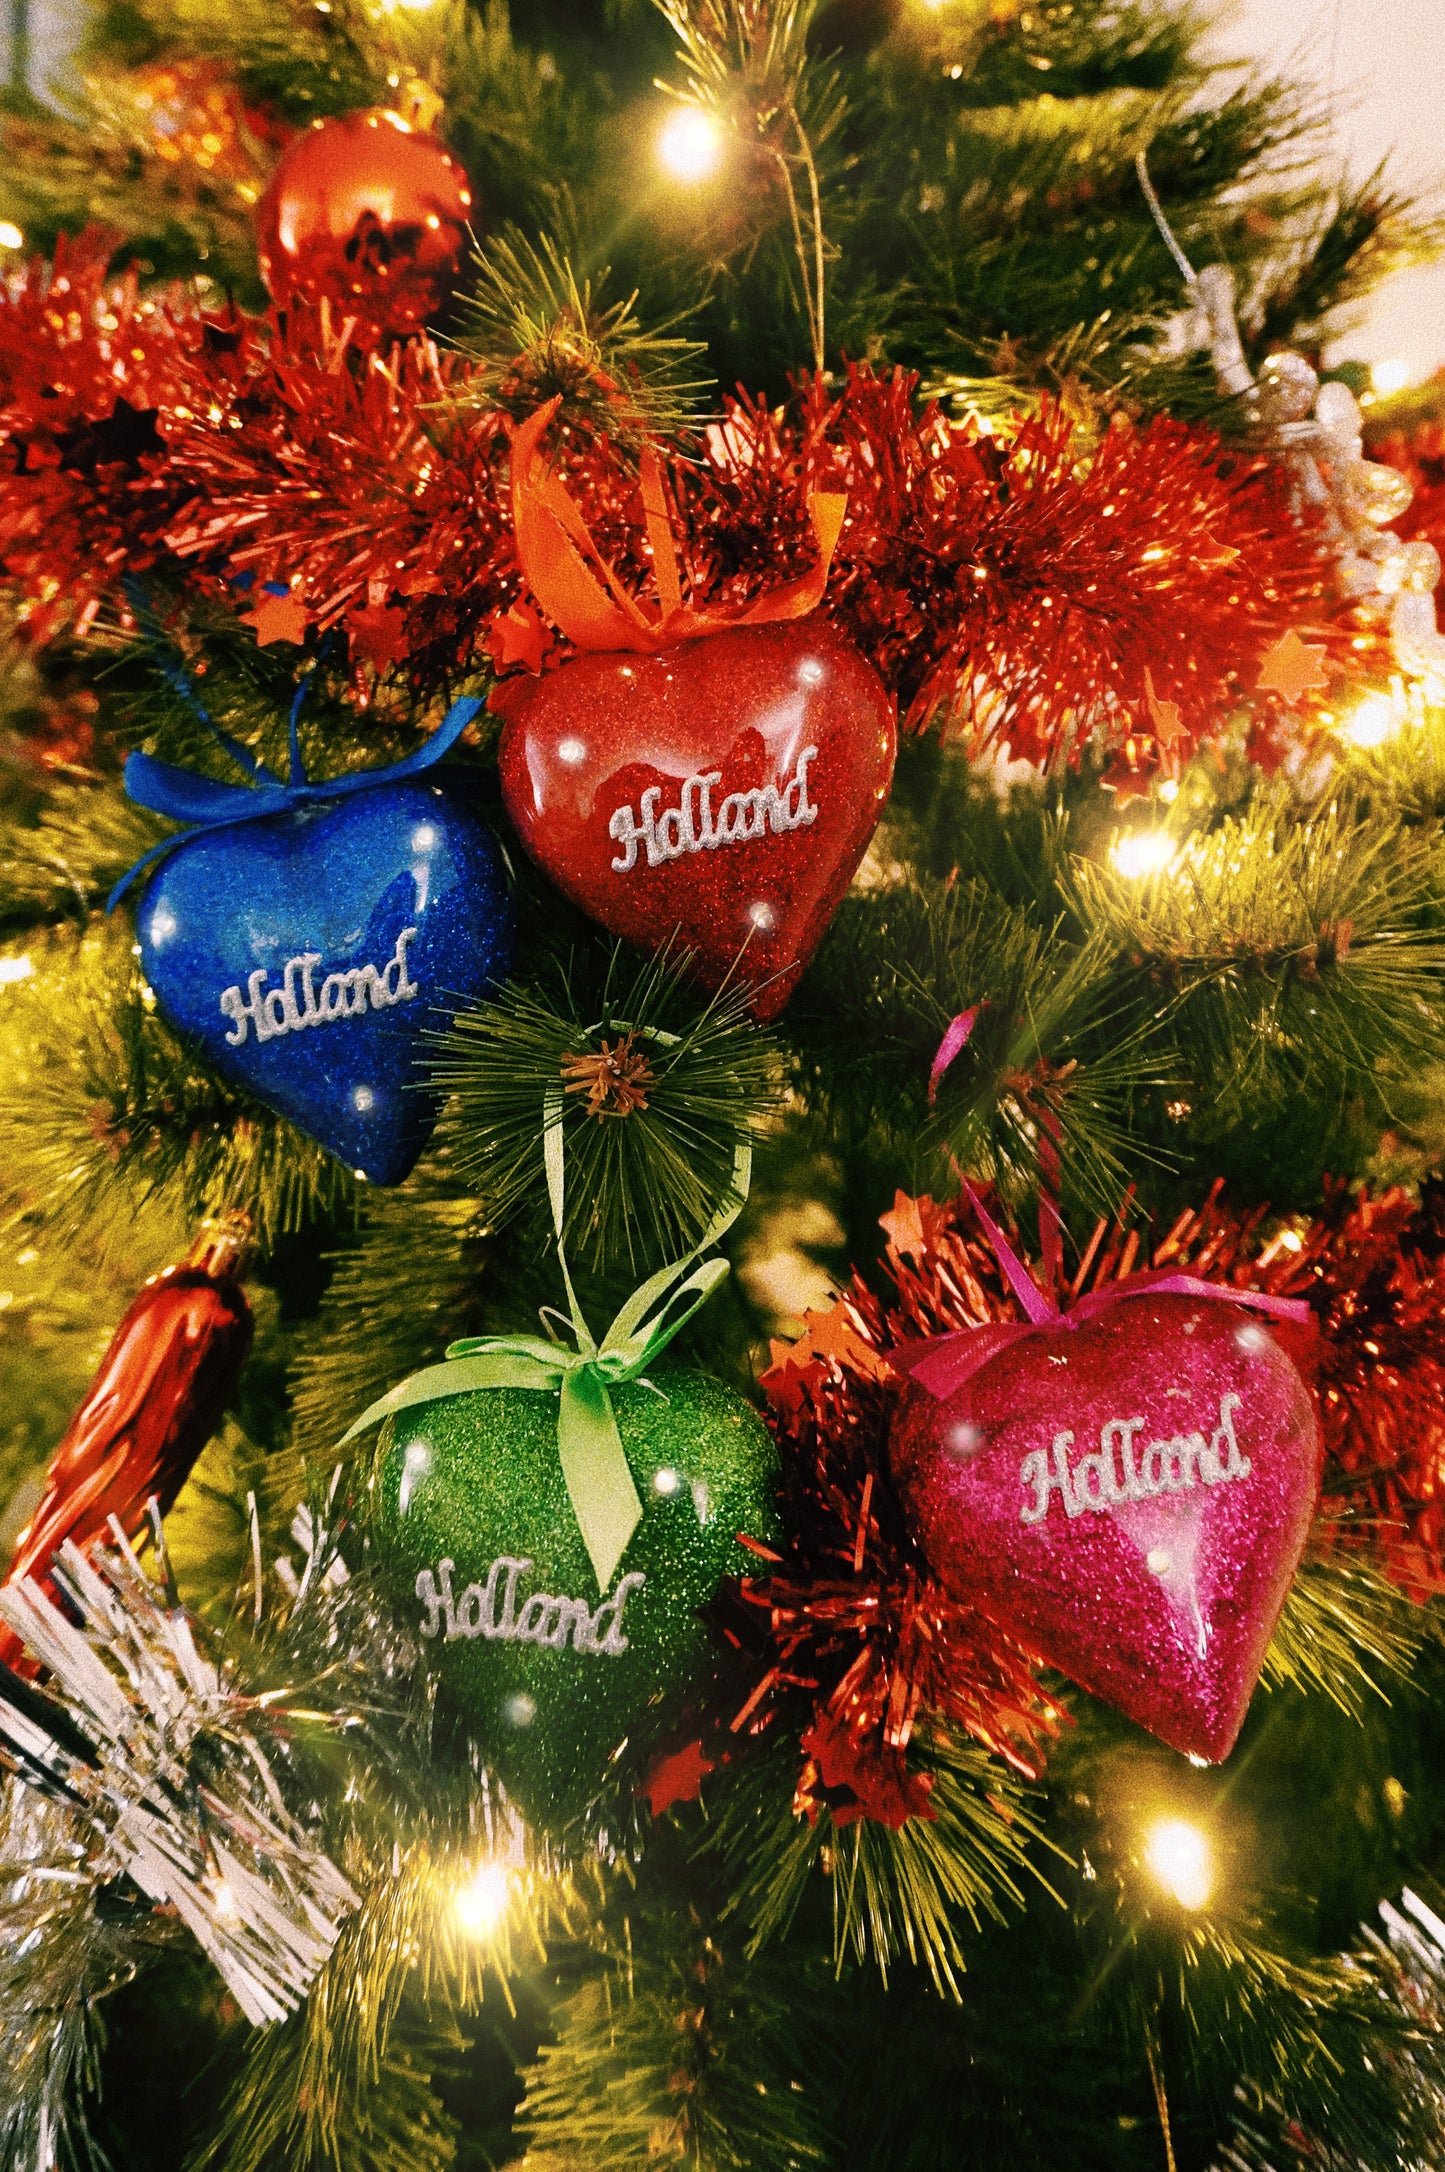 Set Hearts Holland Christmas Ornaments with Light